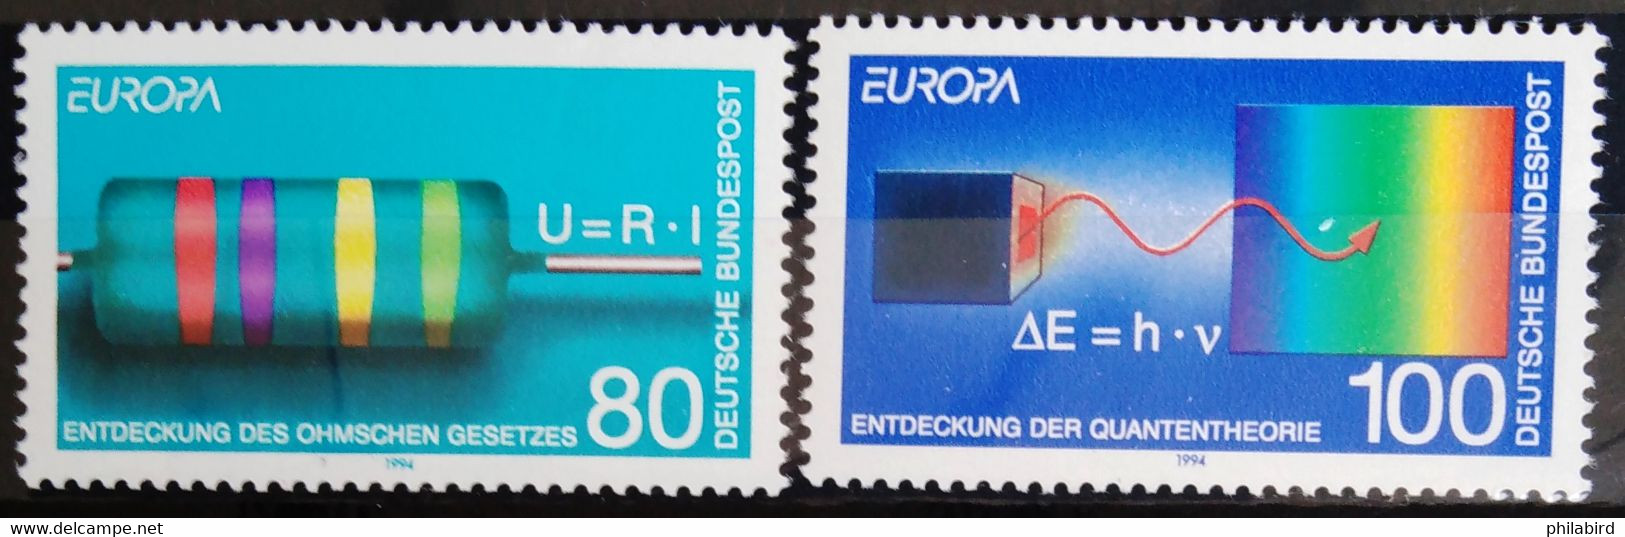 EUROPA 1994 - ALLEMAGNE                         N° 1561/1562                         NEUF** - 1994